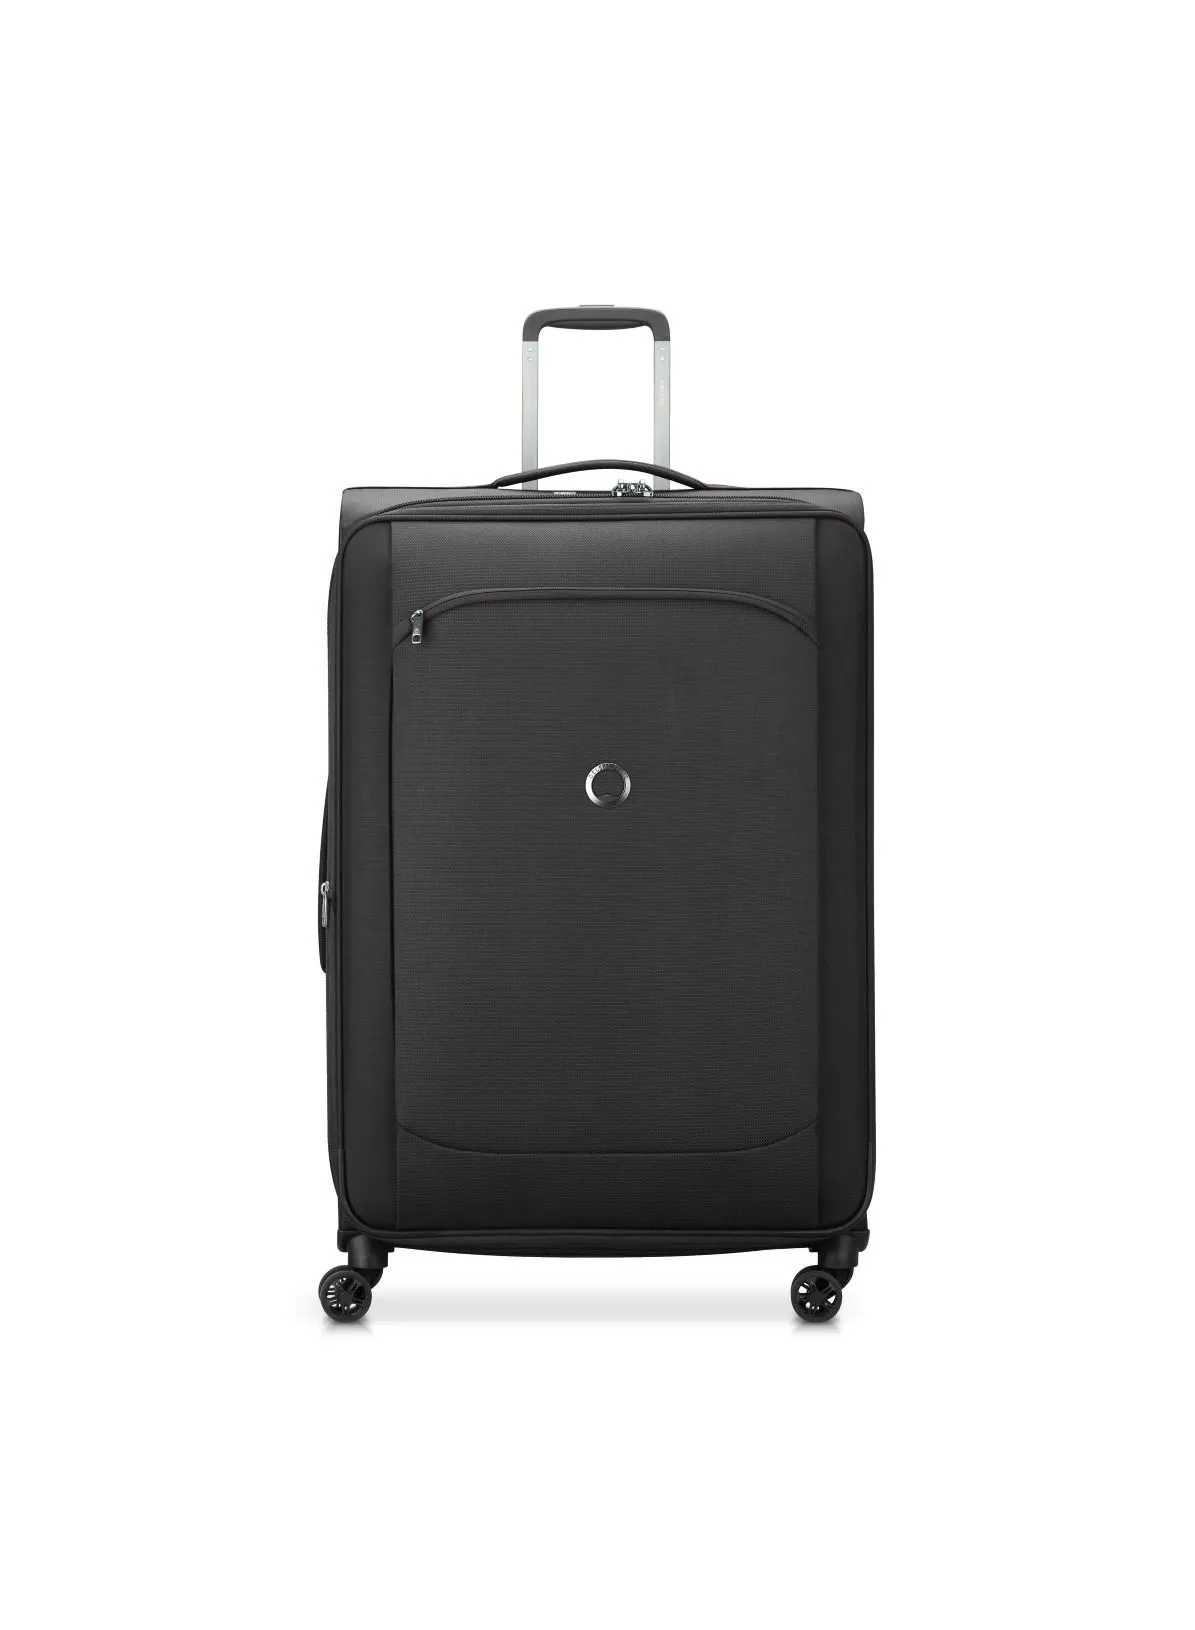 DELSEY Montmartre air 2.0 luggage trolley 83CM